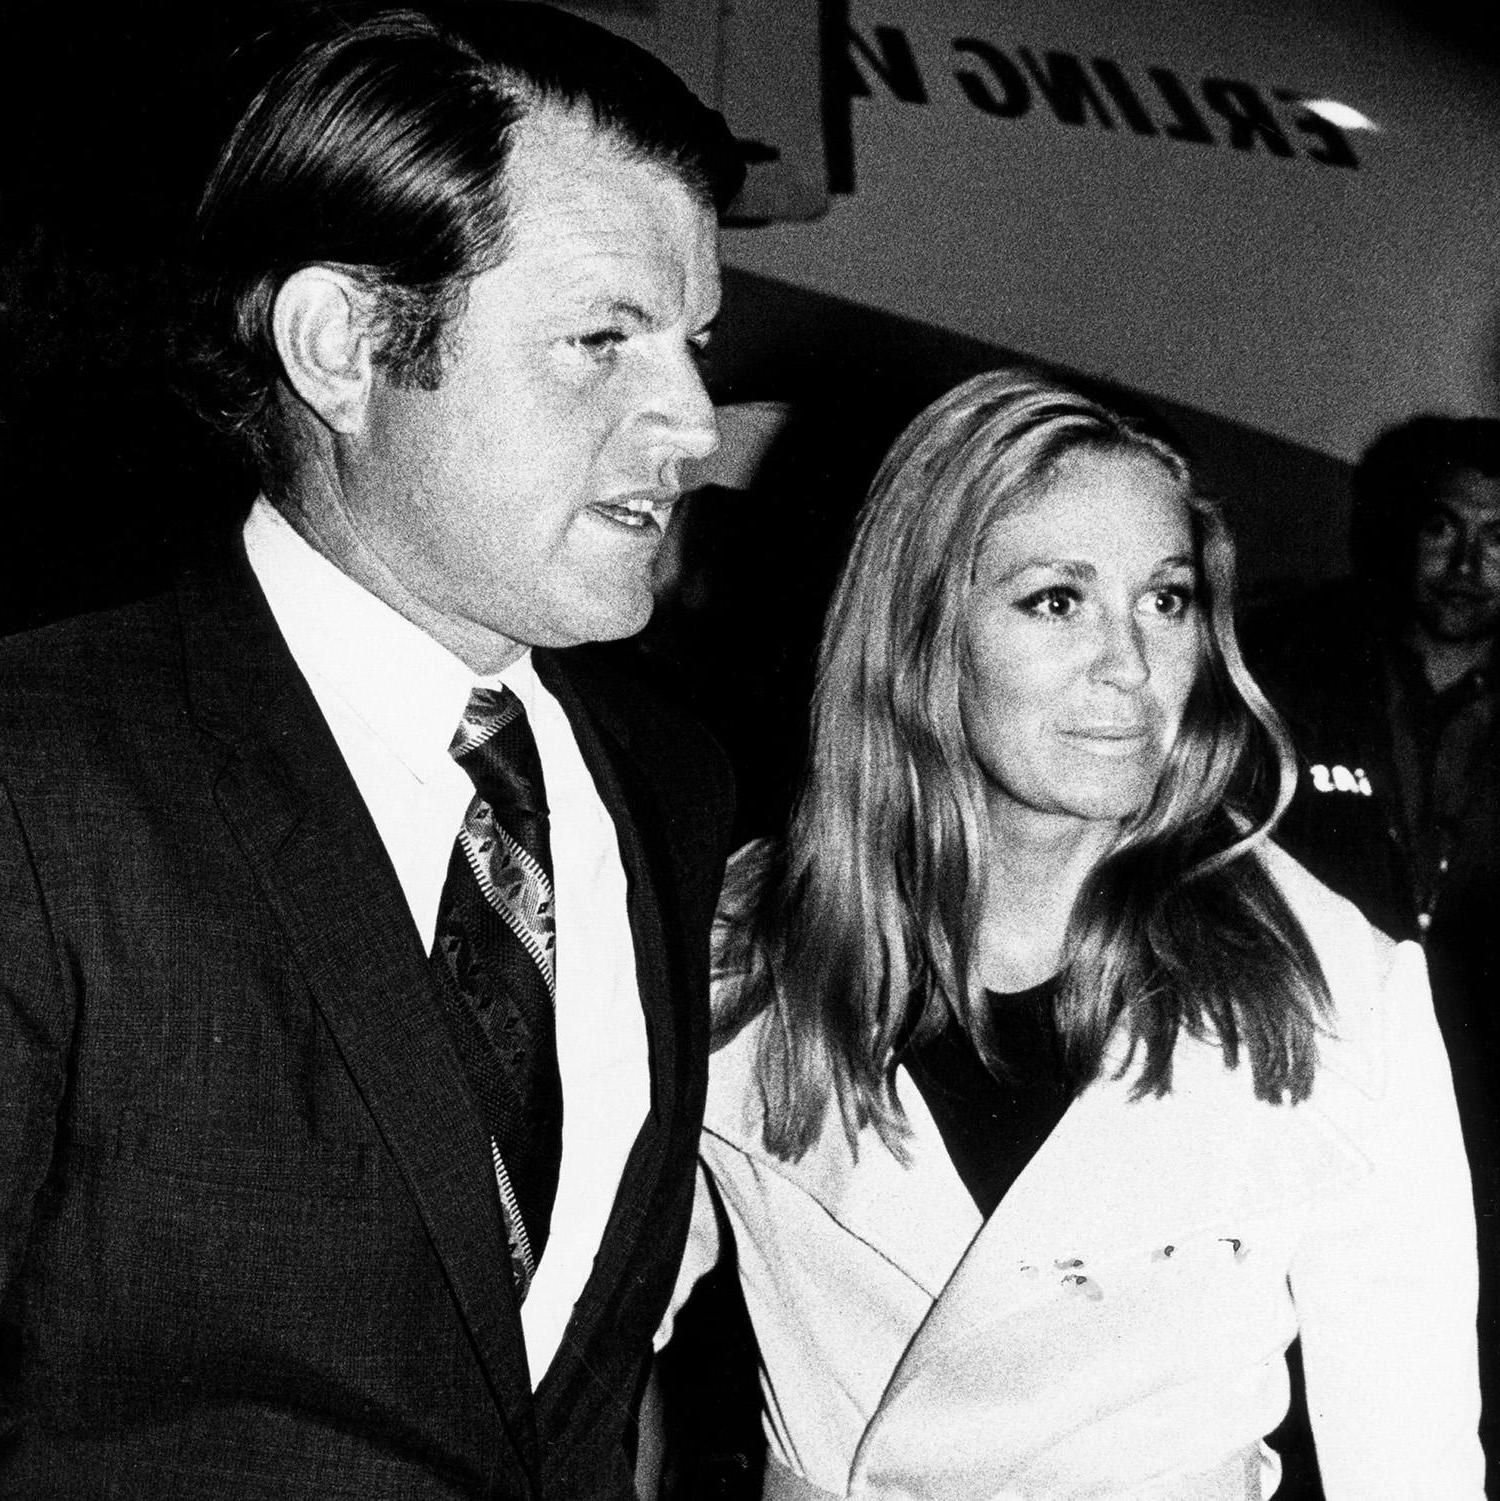 Image of Joan Kennedy with husband Ted Kennedy